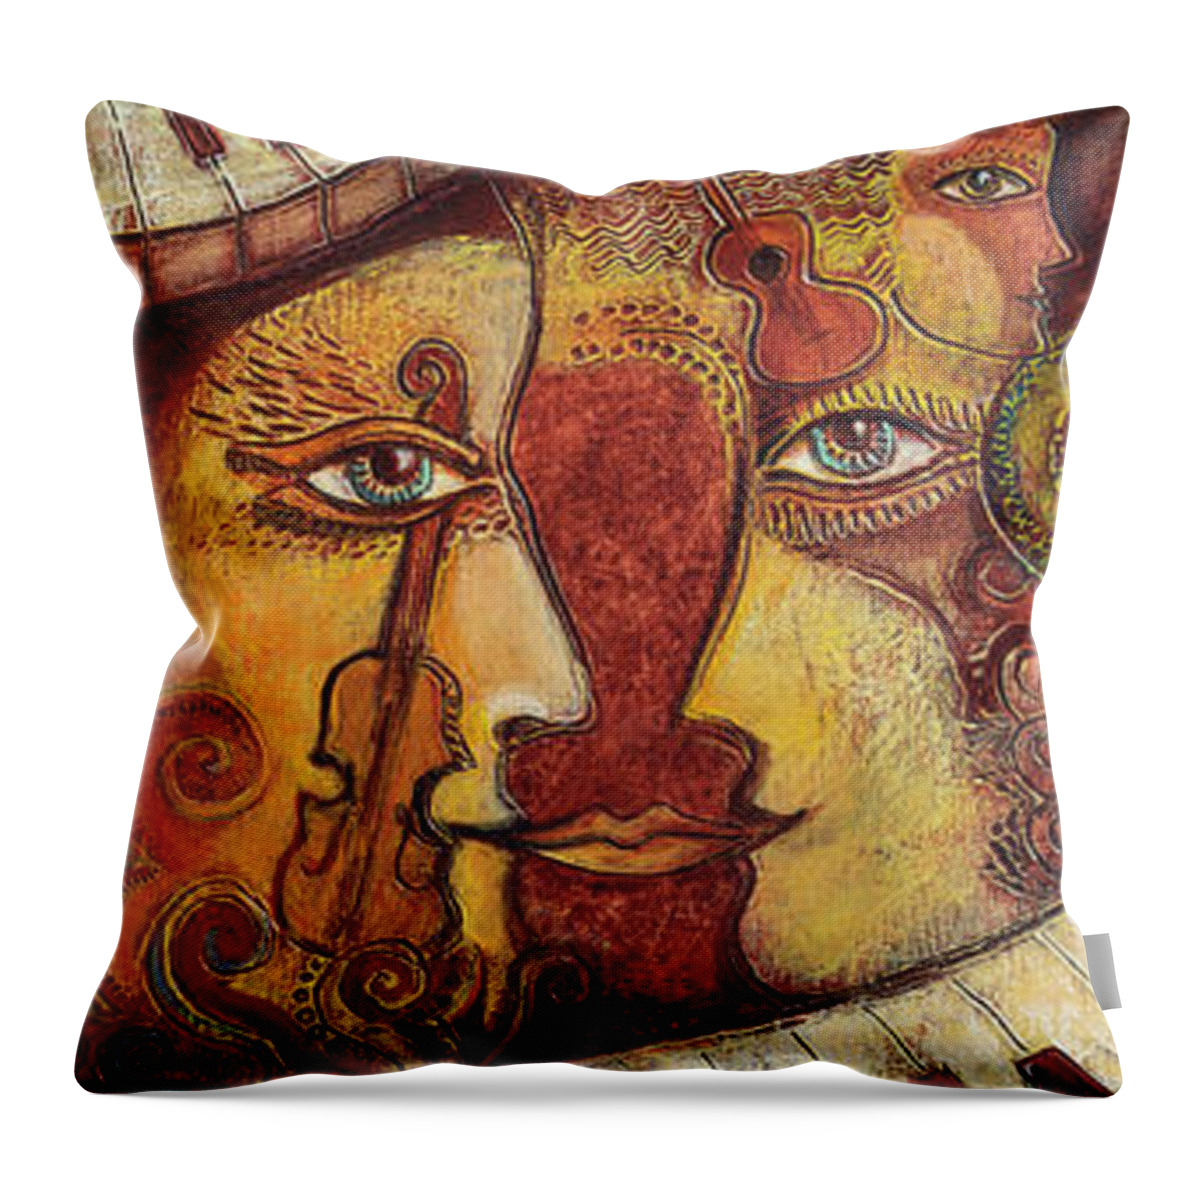 Music Throw Pillow featuring the painting Navigating Rhythm by Mary DeLave